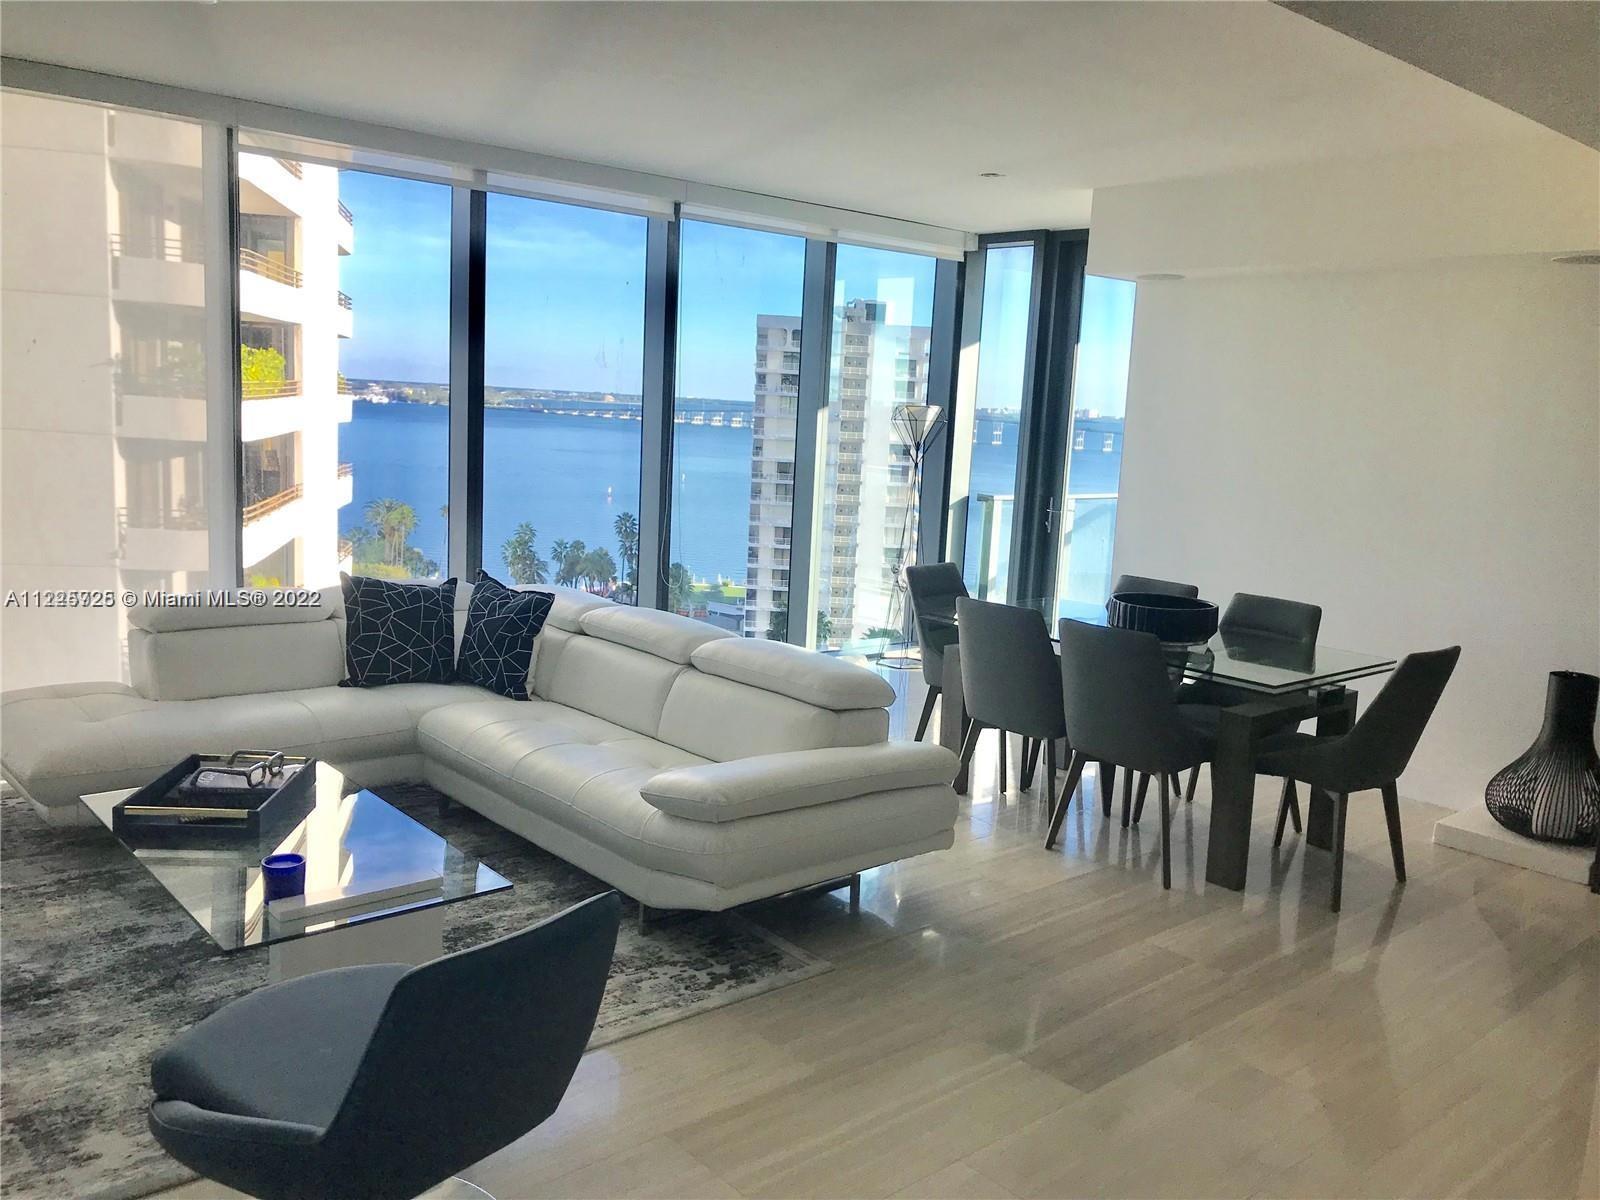 Incredible opportunity to own a stunning home in the highly sort after Echo Brickell building. #1003